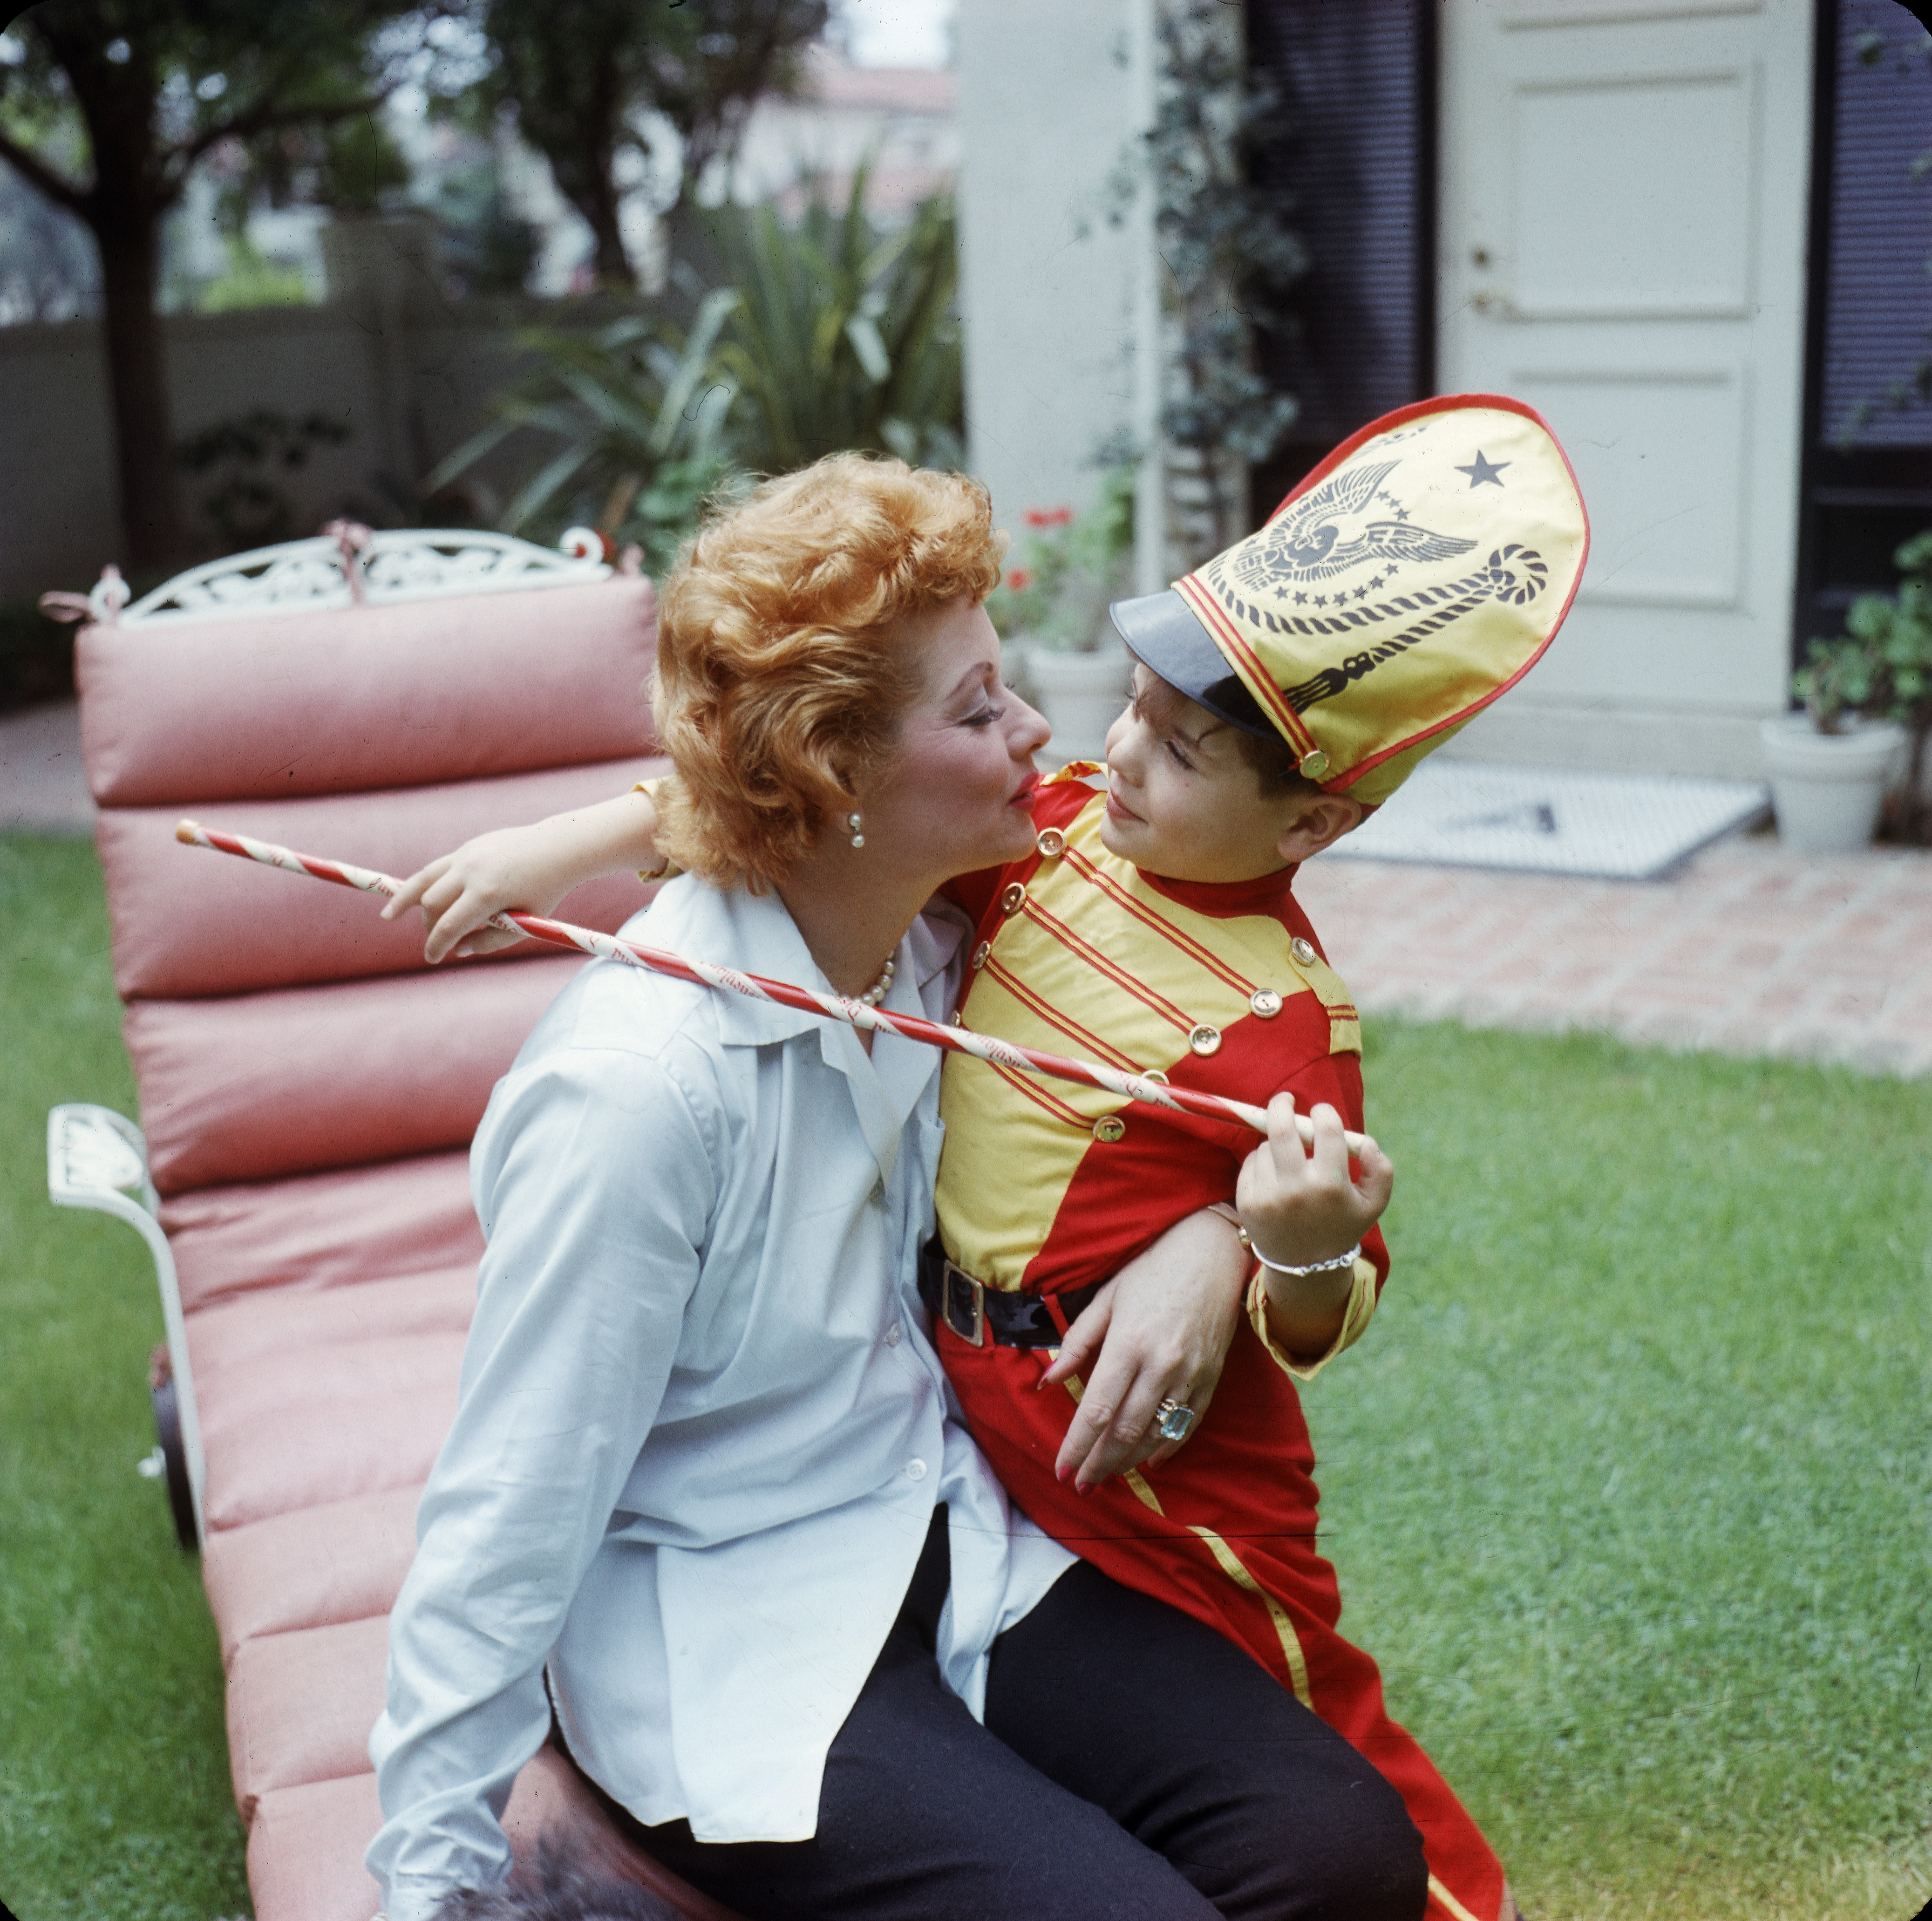 Lucille Ball and her son Desi Arnaz Jr. in the backyard of their Los Angeles, California home in the late 1950s | Source: Getty Images